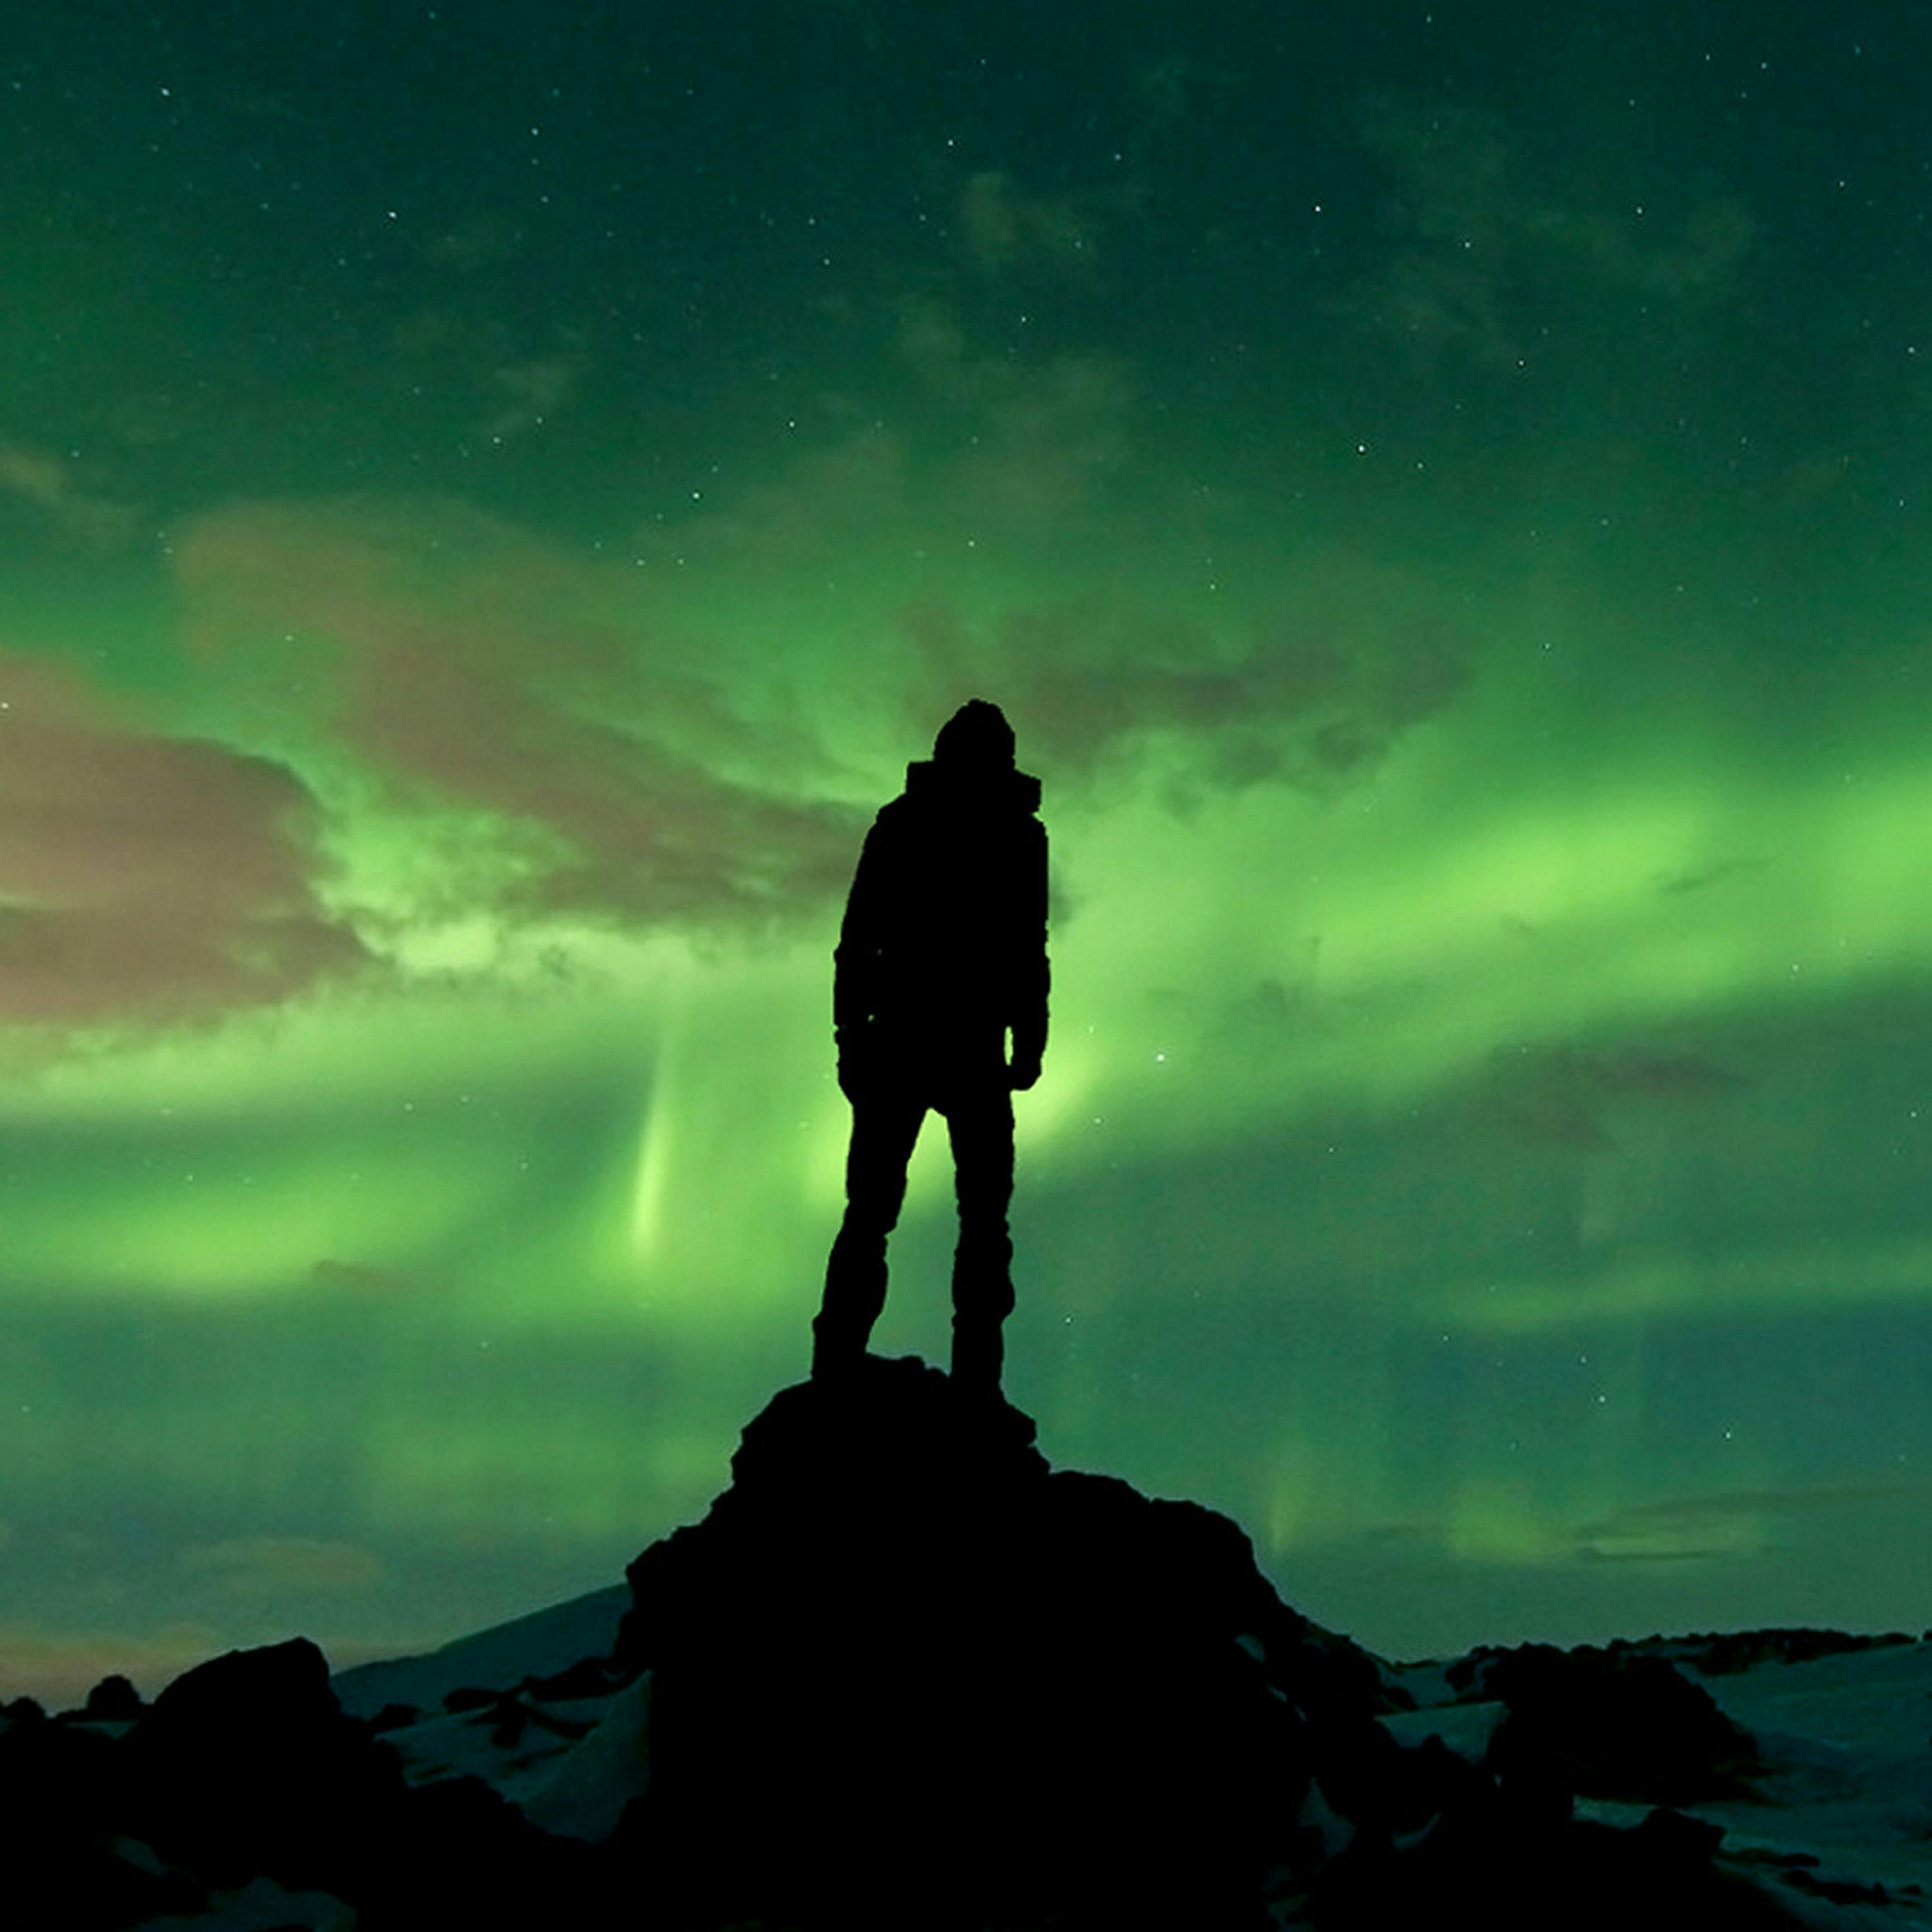 Interview: How to see the Northern Lights